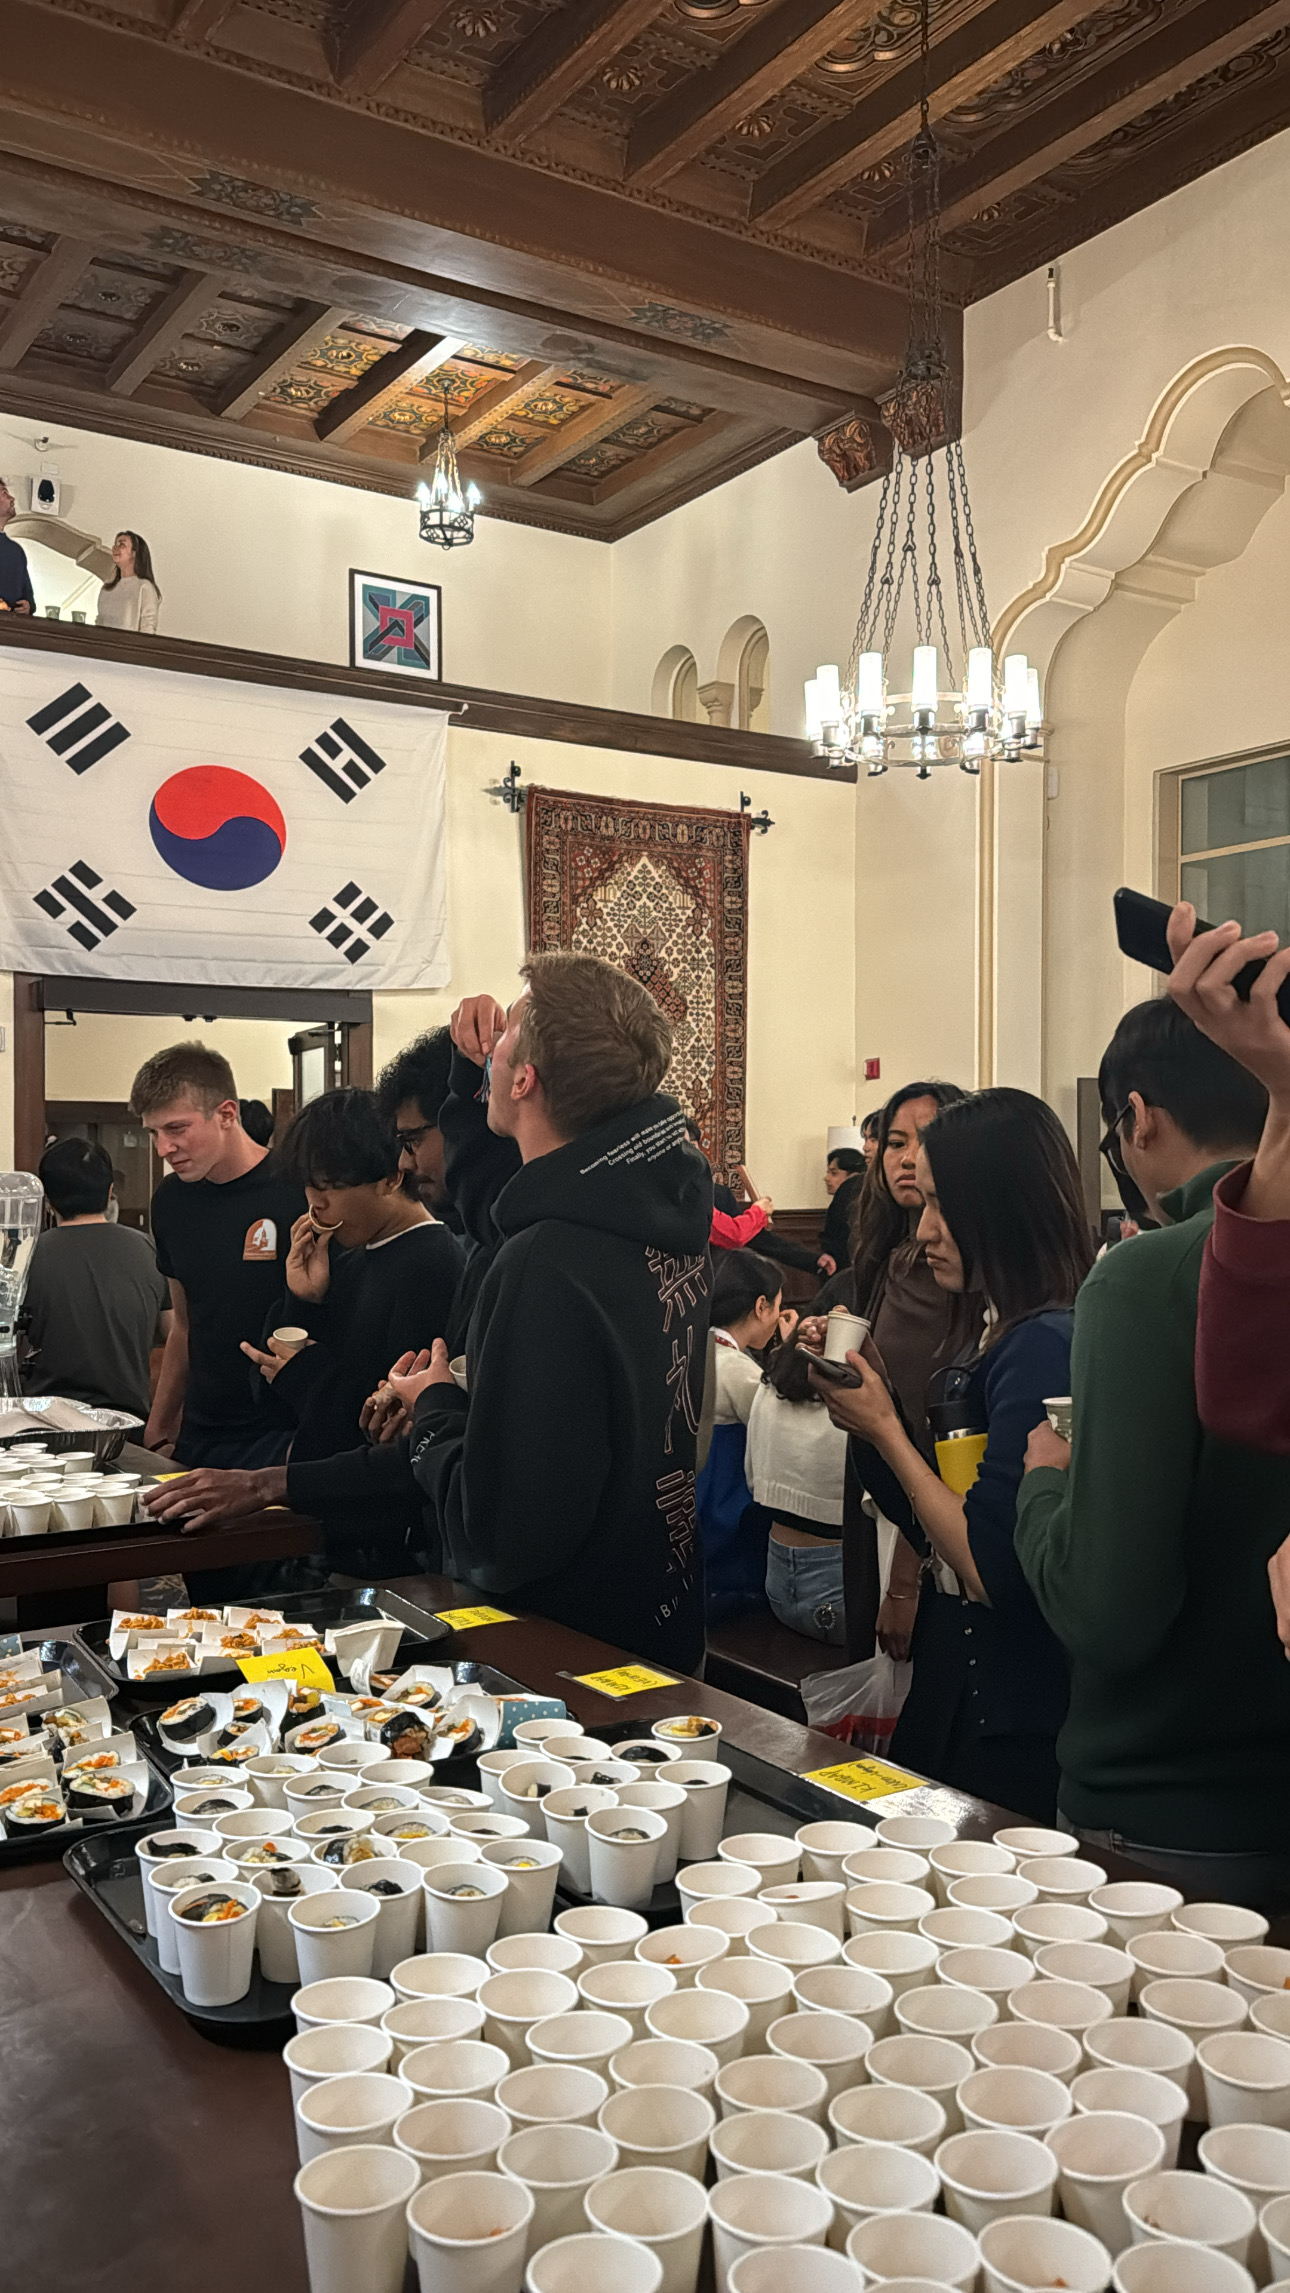 South Korean decor and food, in a gathering of students for DiversiTEA.